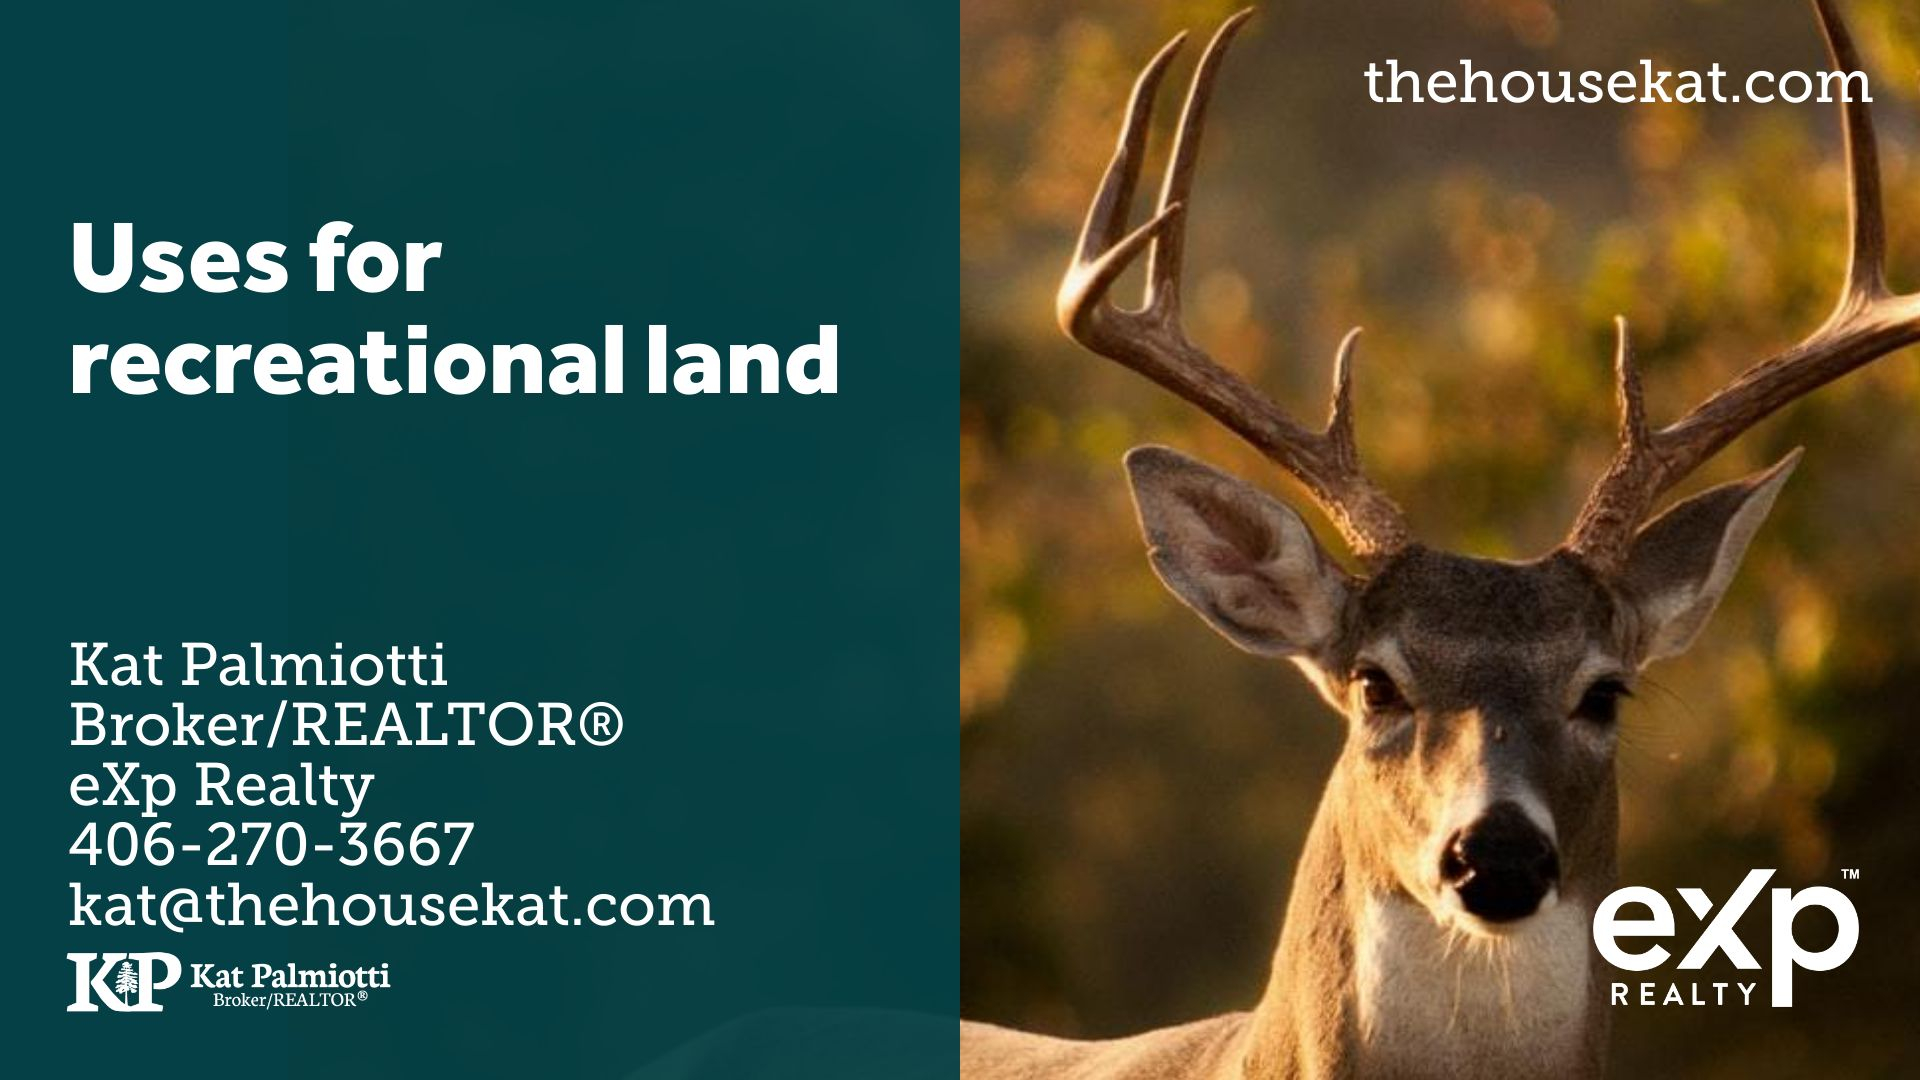 Uses for recreational land cover photo with deer